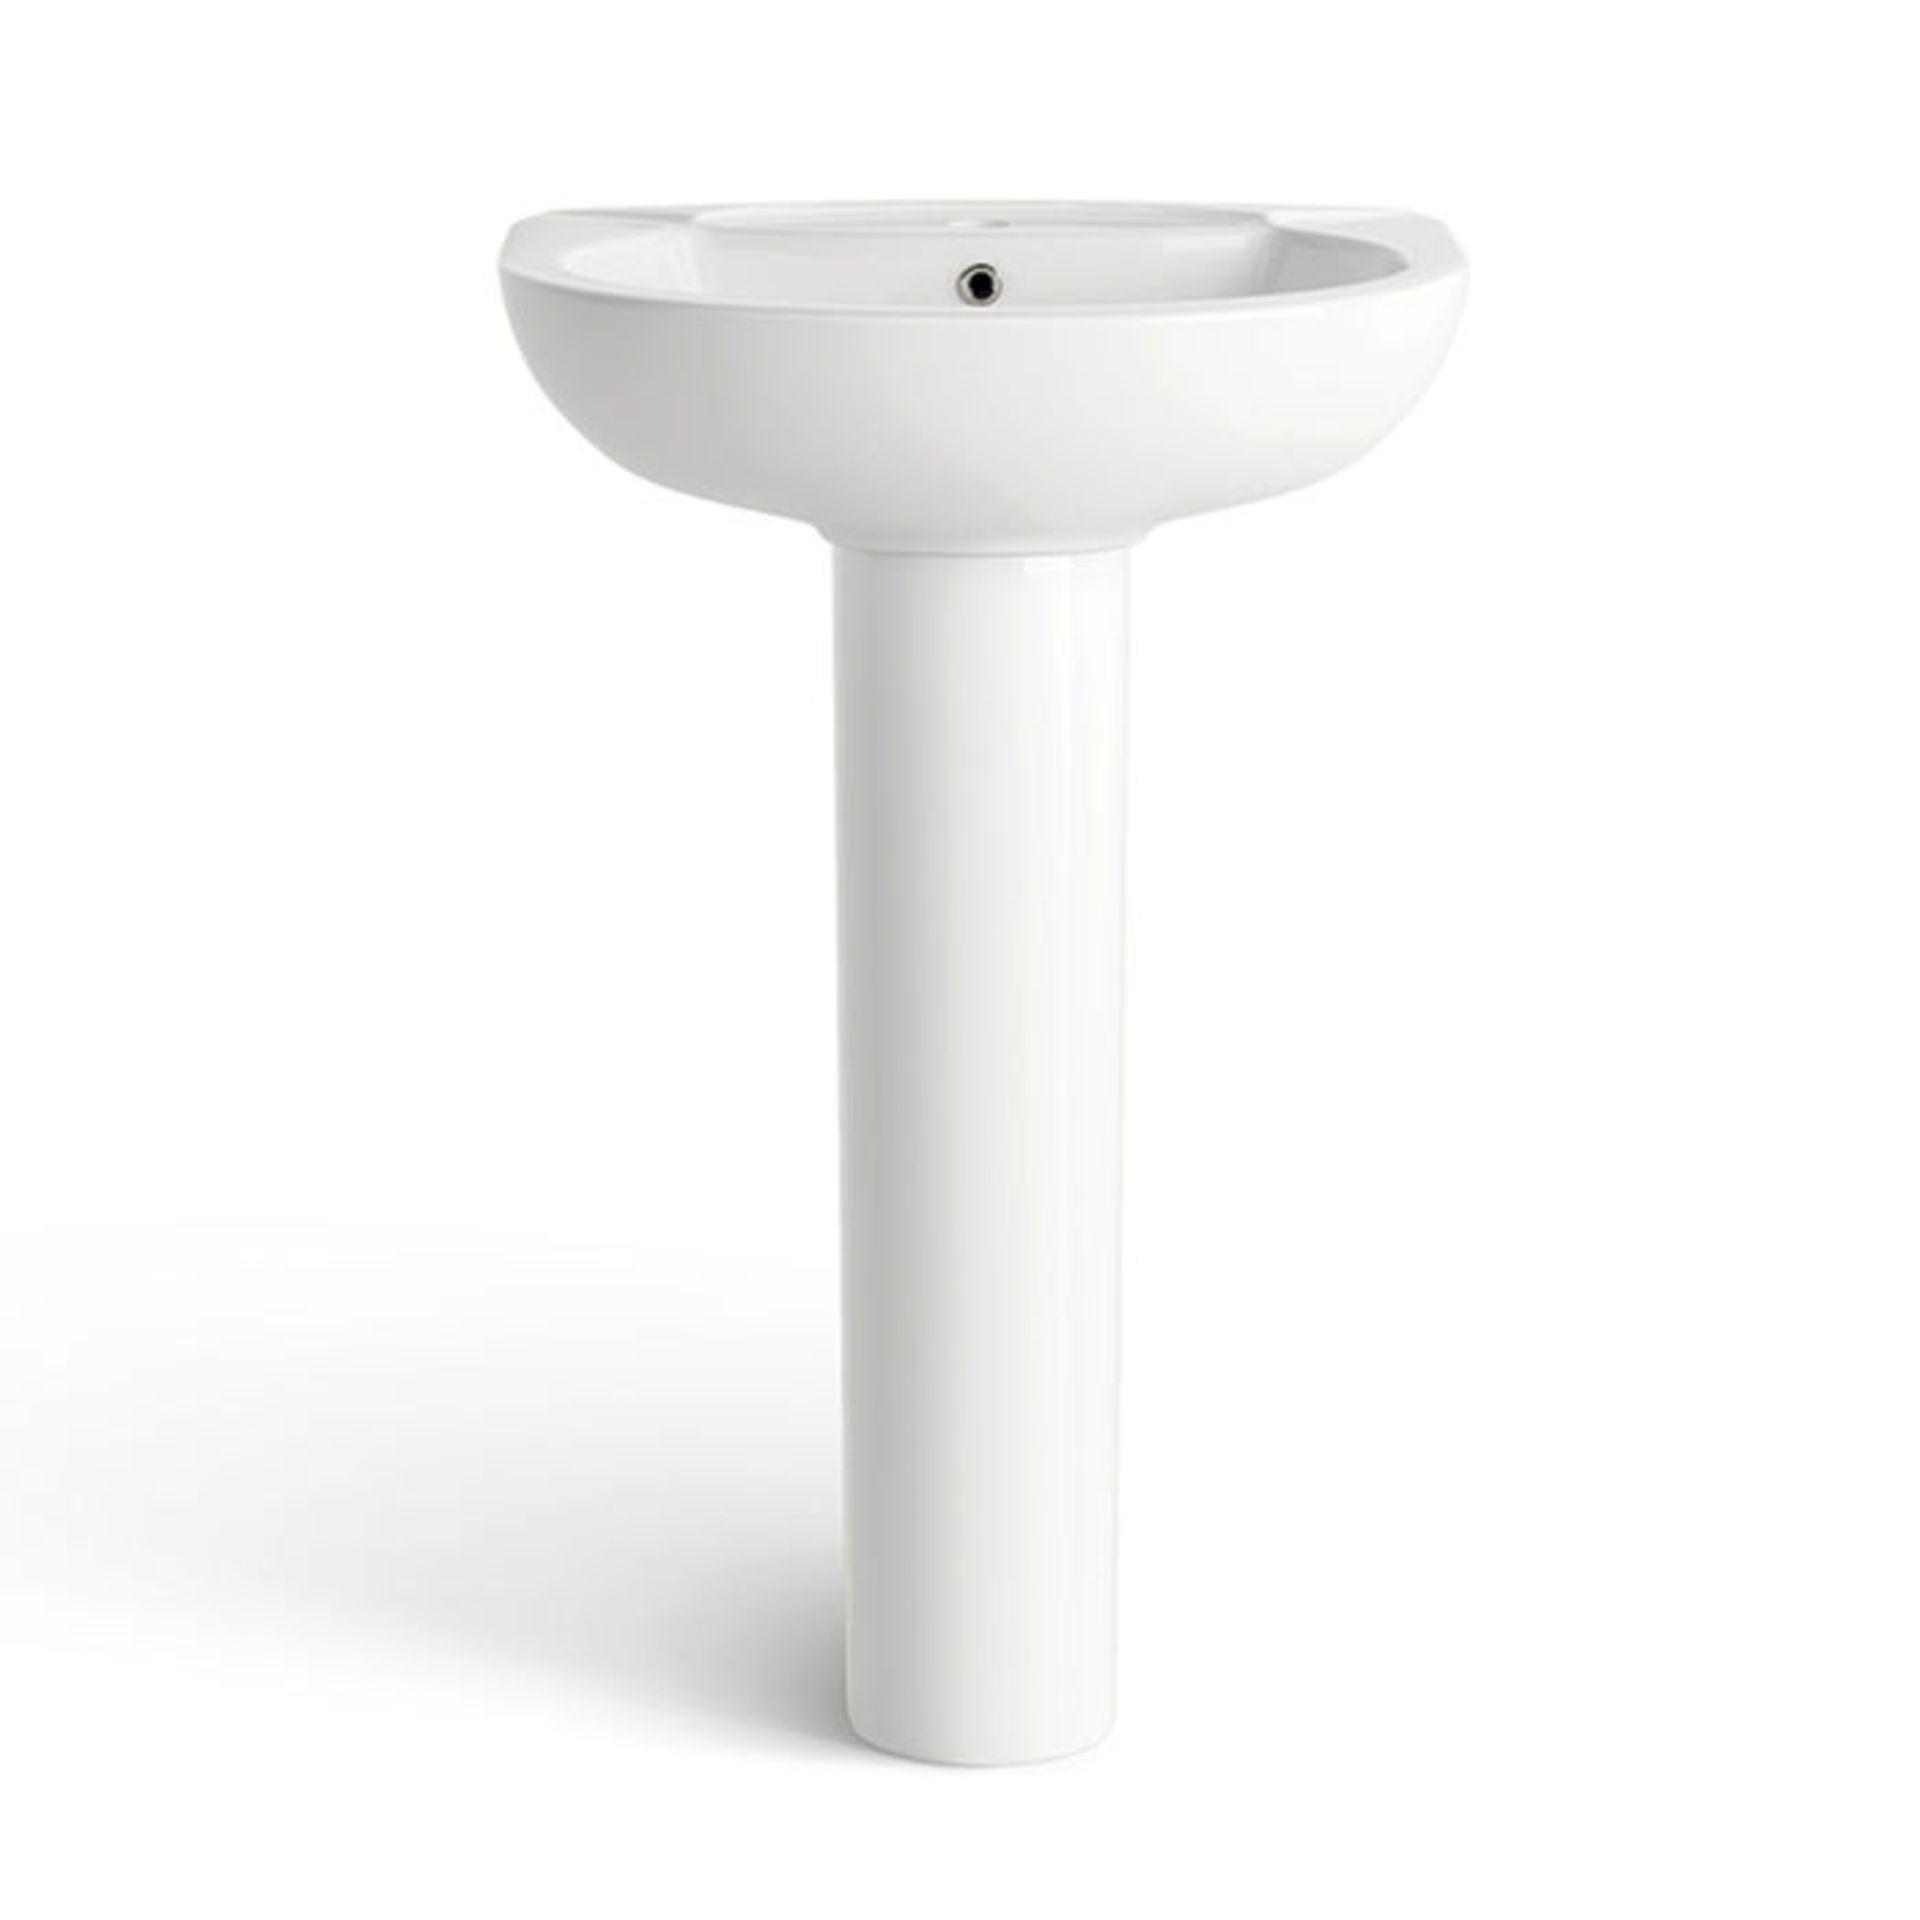 (XX110) Quartz Sink & Pedestal - Single Tap Hole. Made from White Vitreous China and finished w... - Image 2 of 2